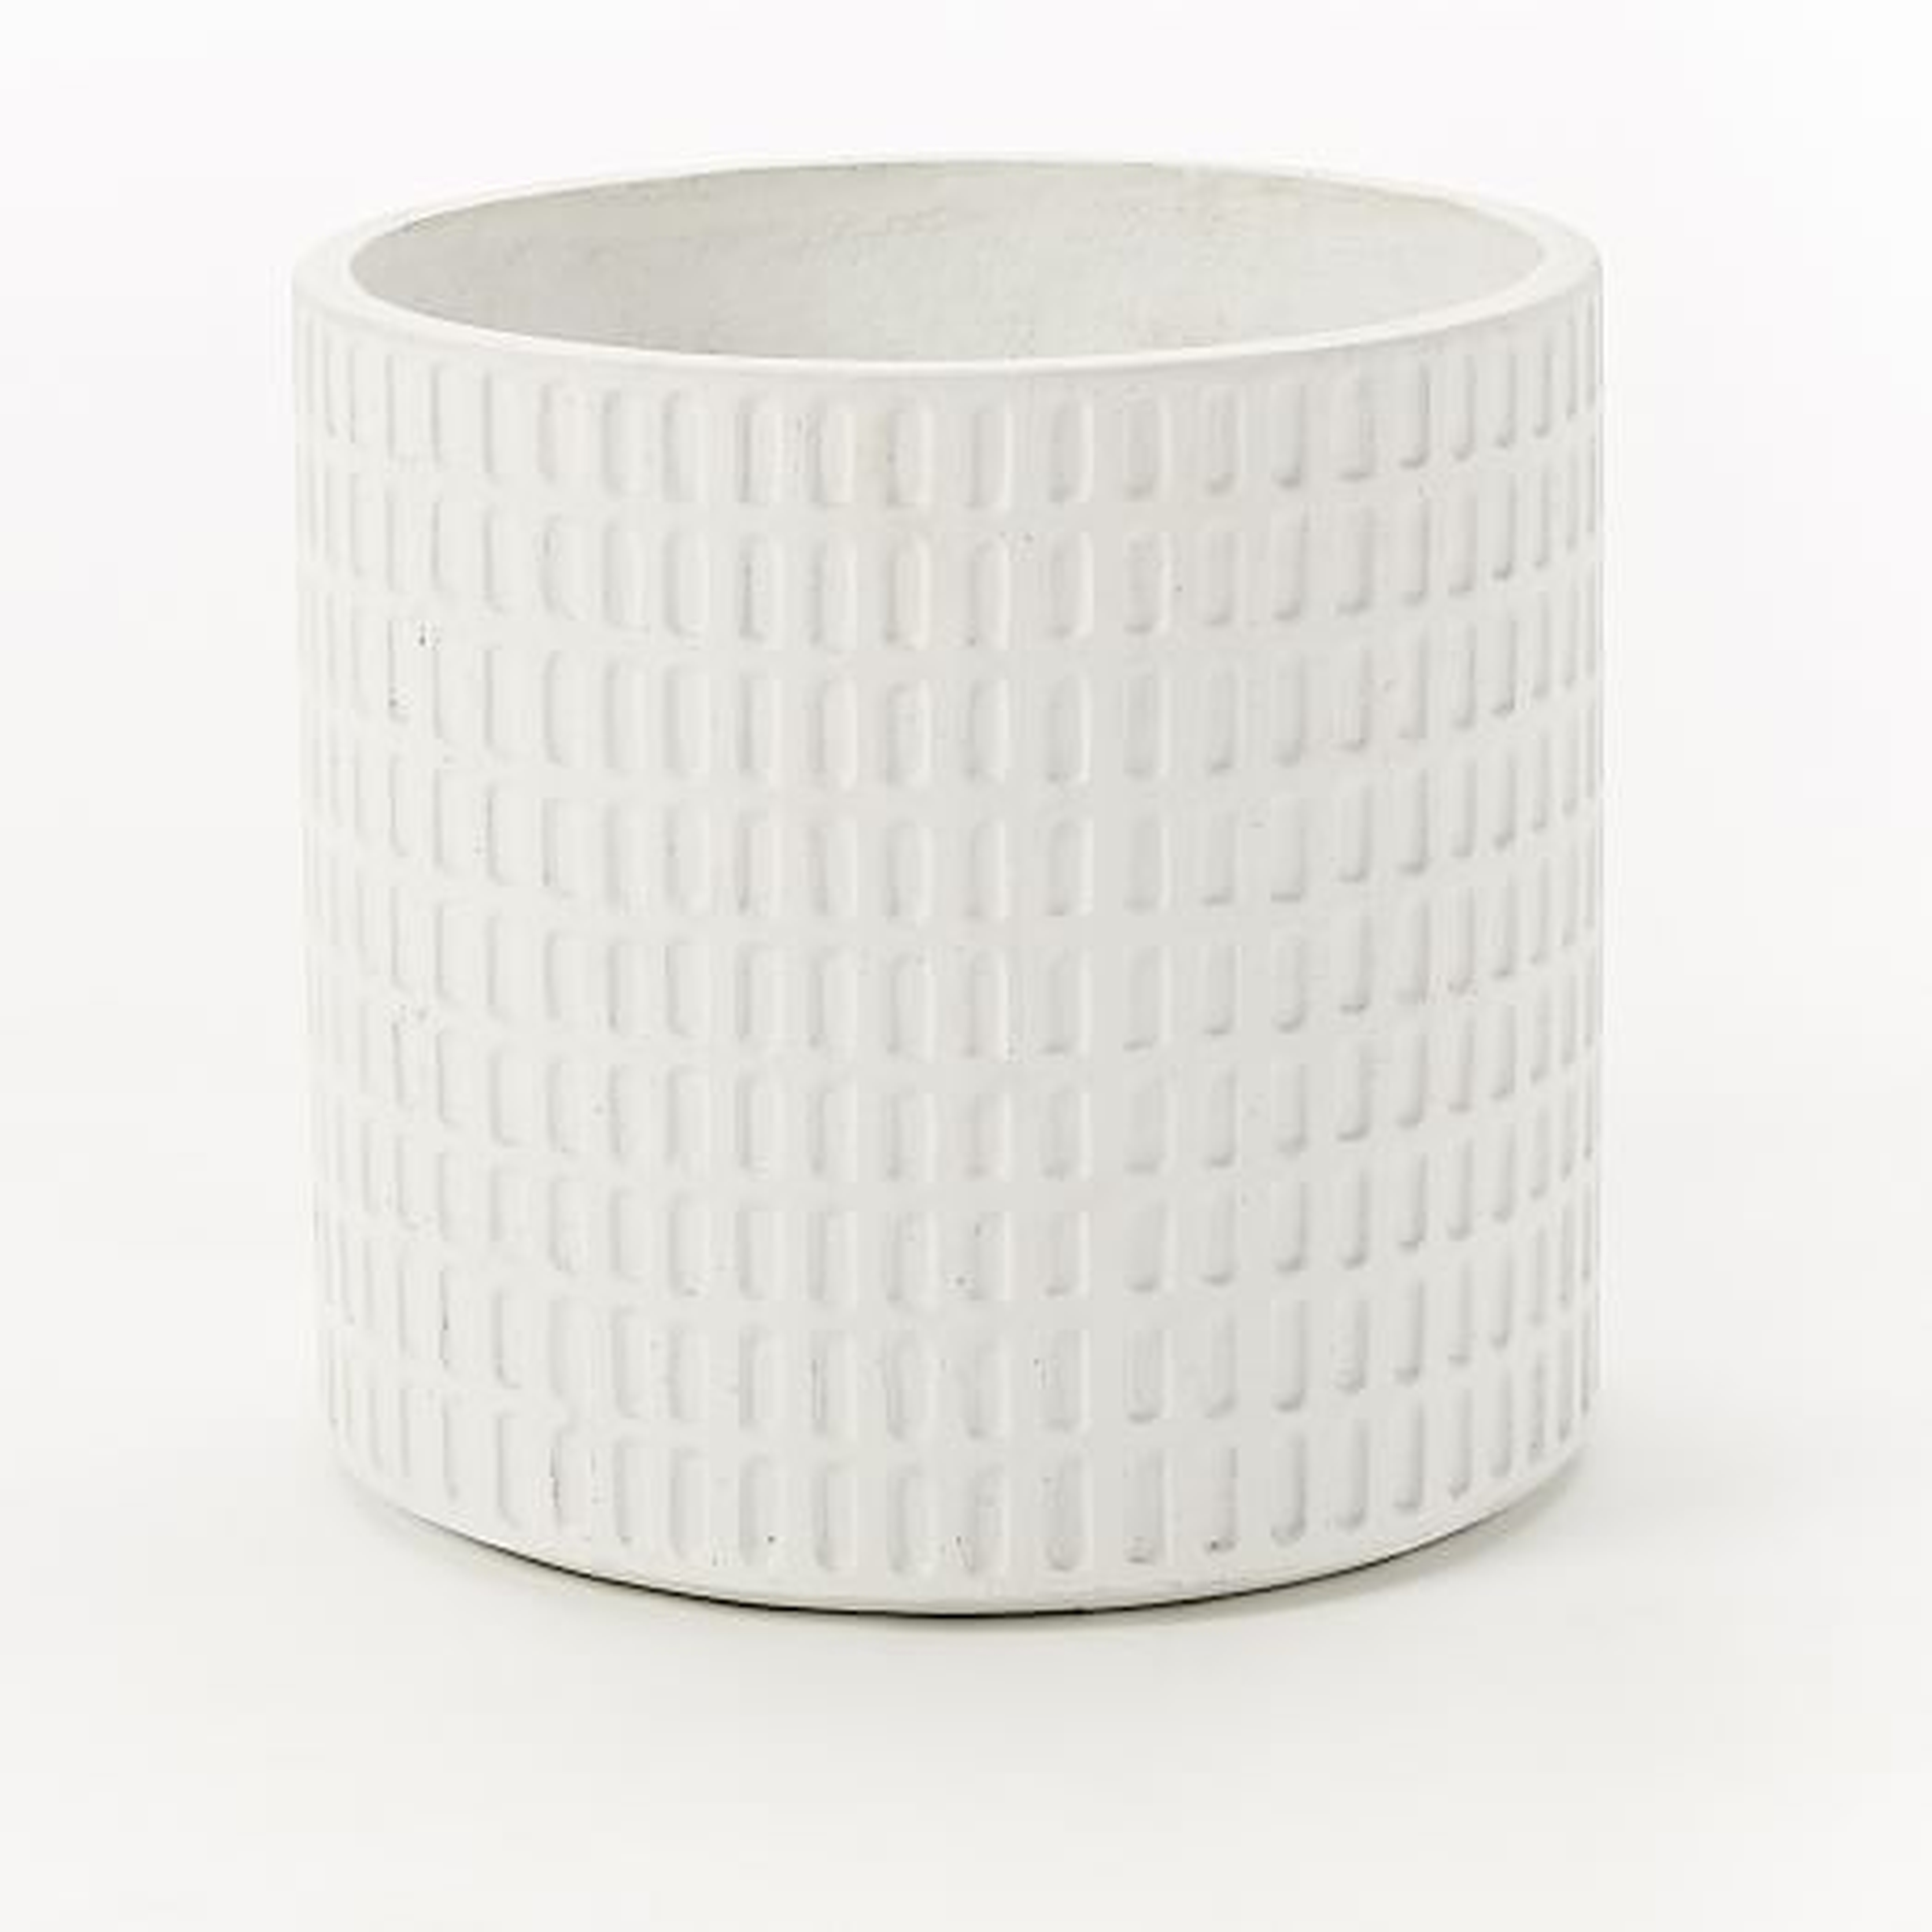 Grid Planters - Tall - West Elm